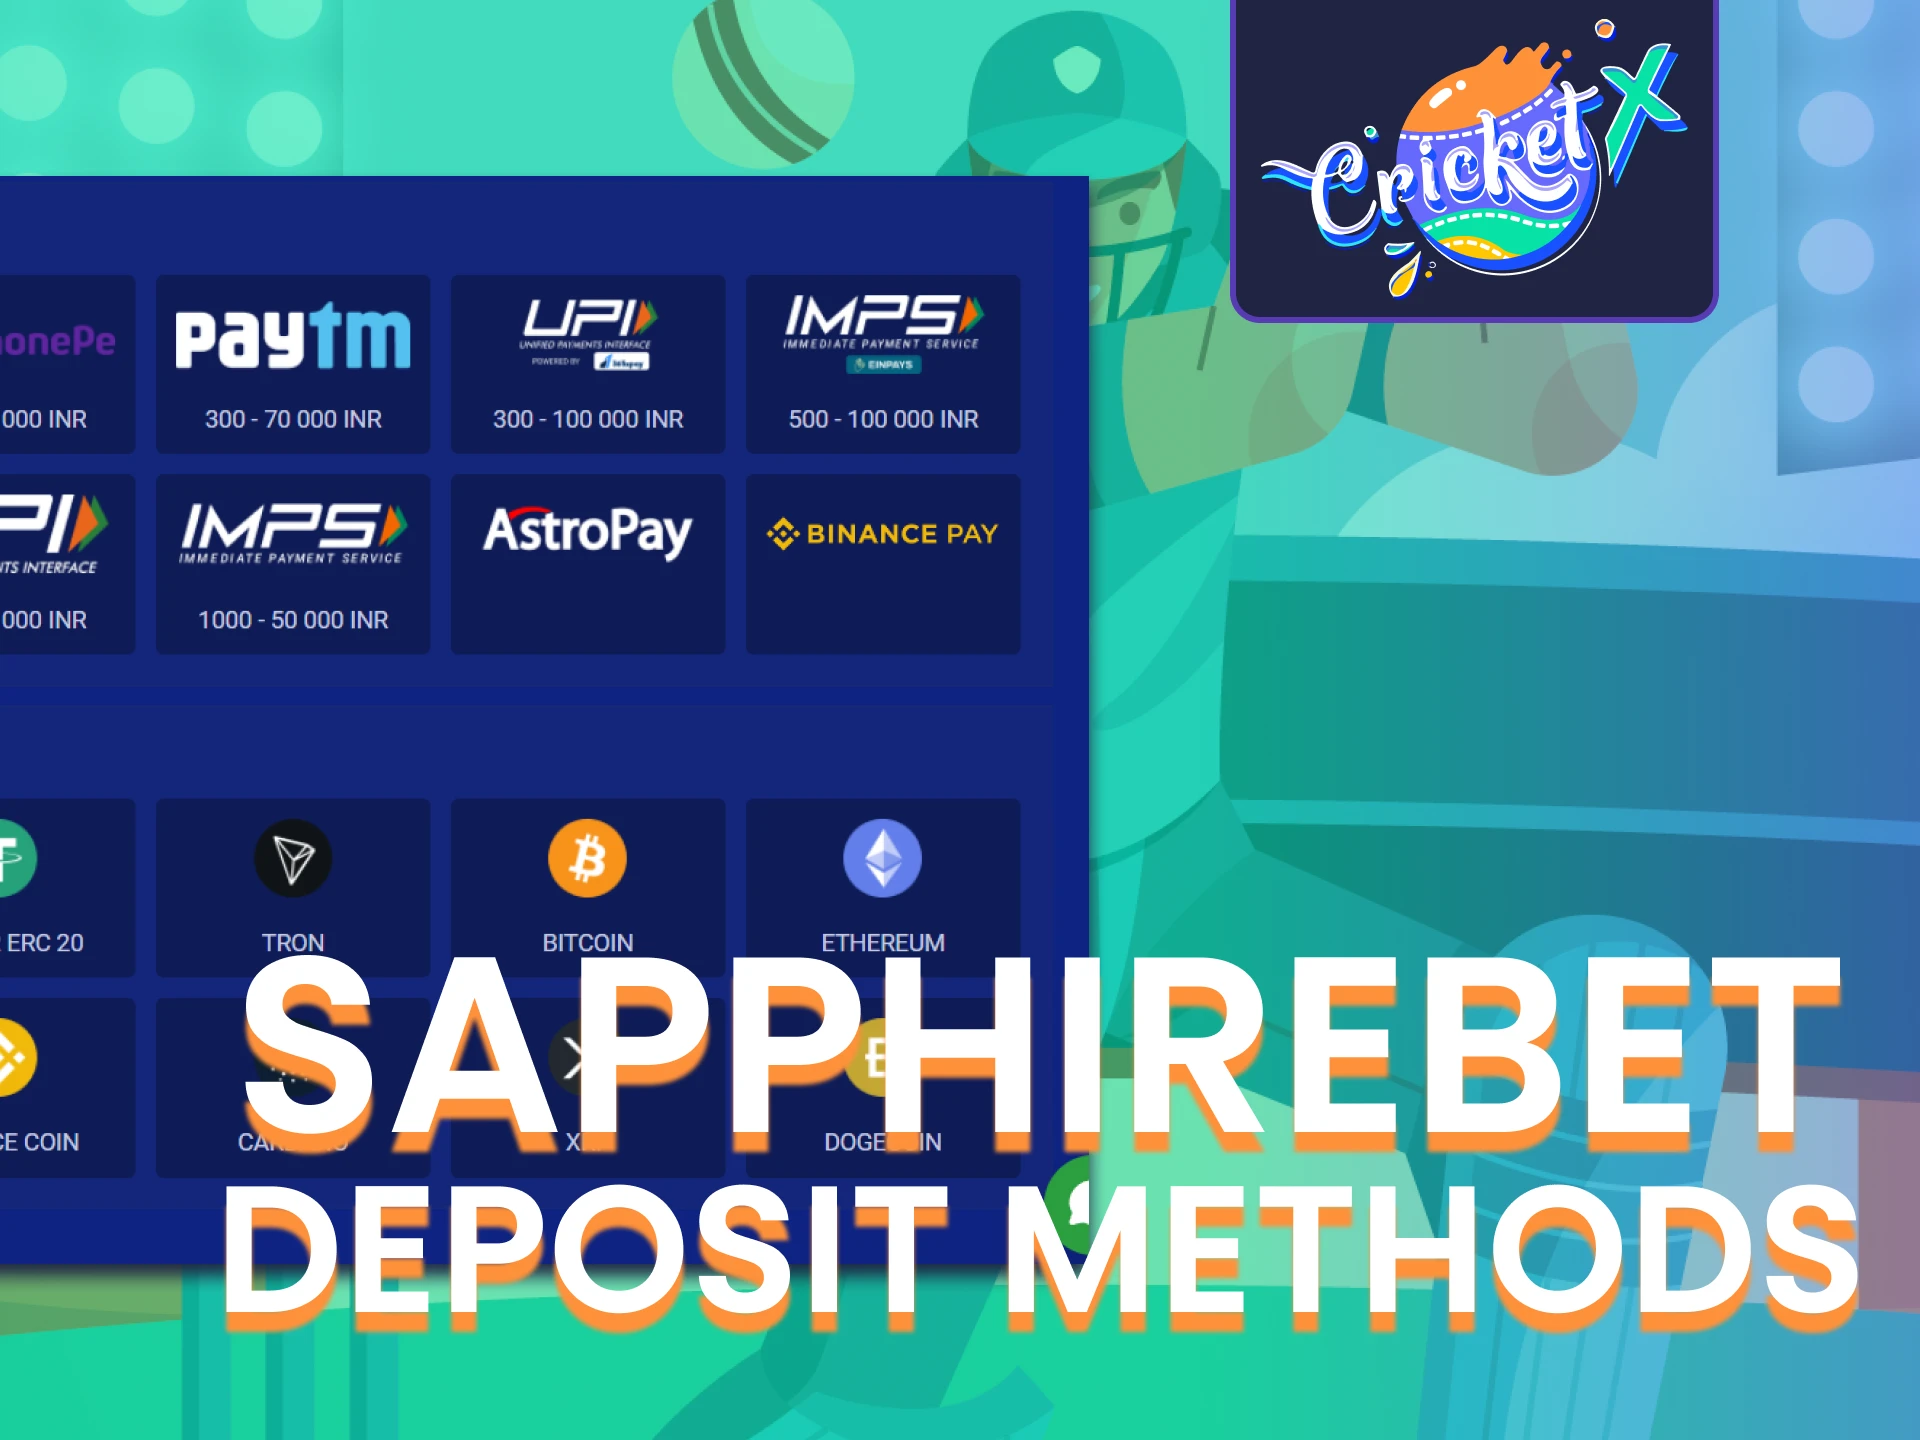 Find out how to top up your account on the Sapphirebet website.